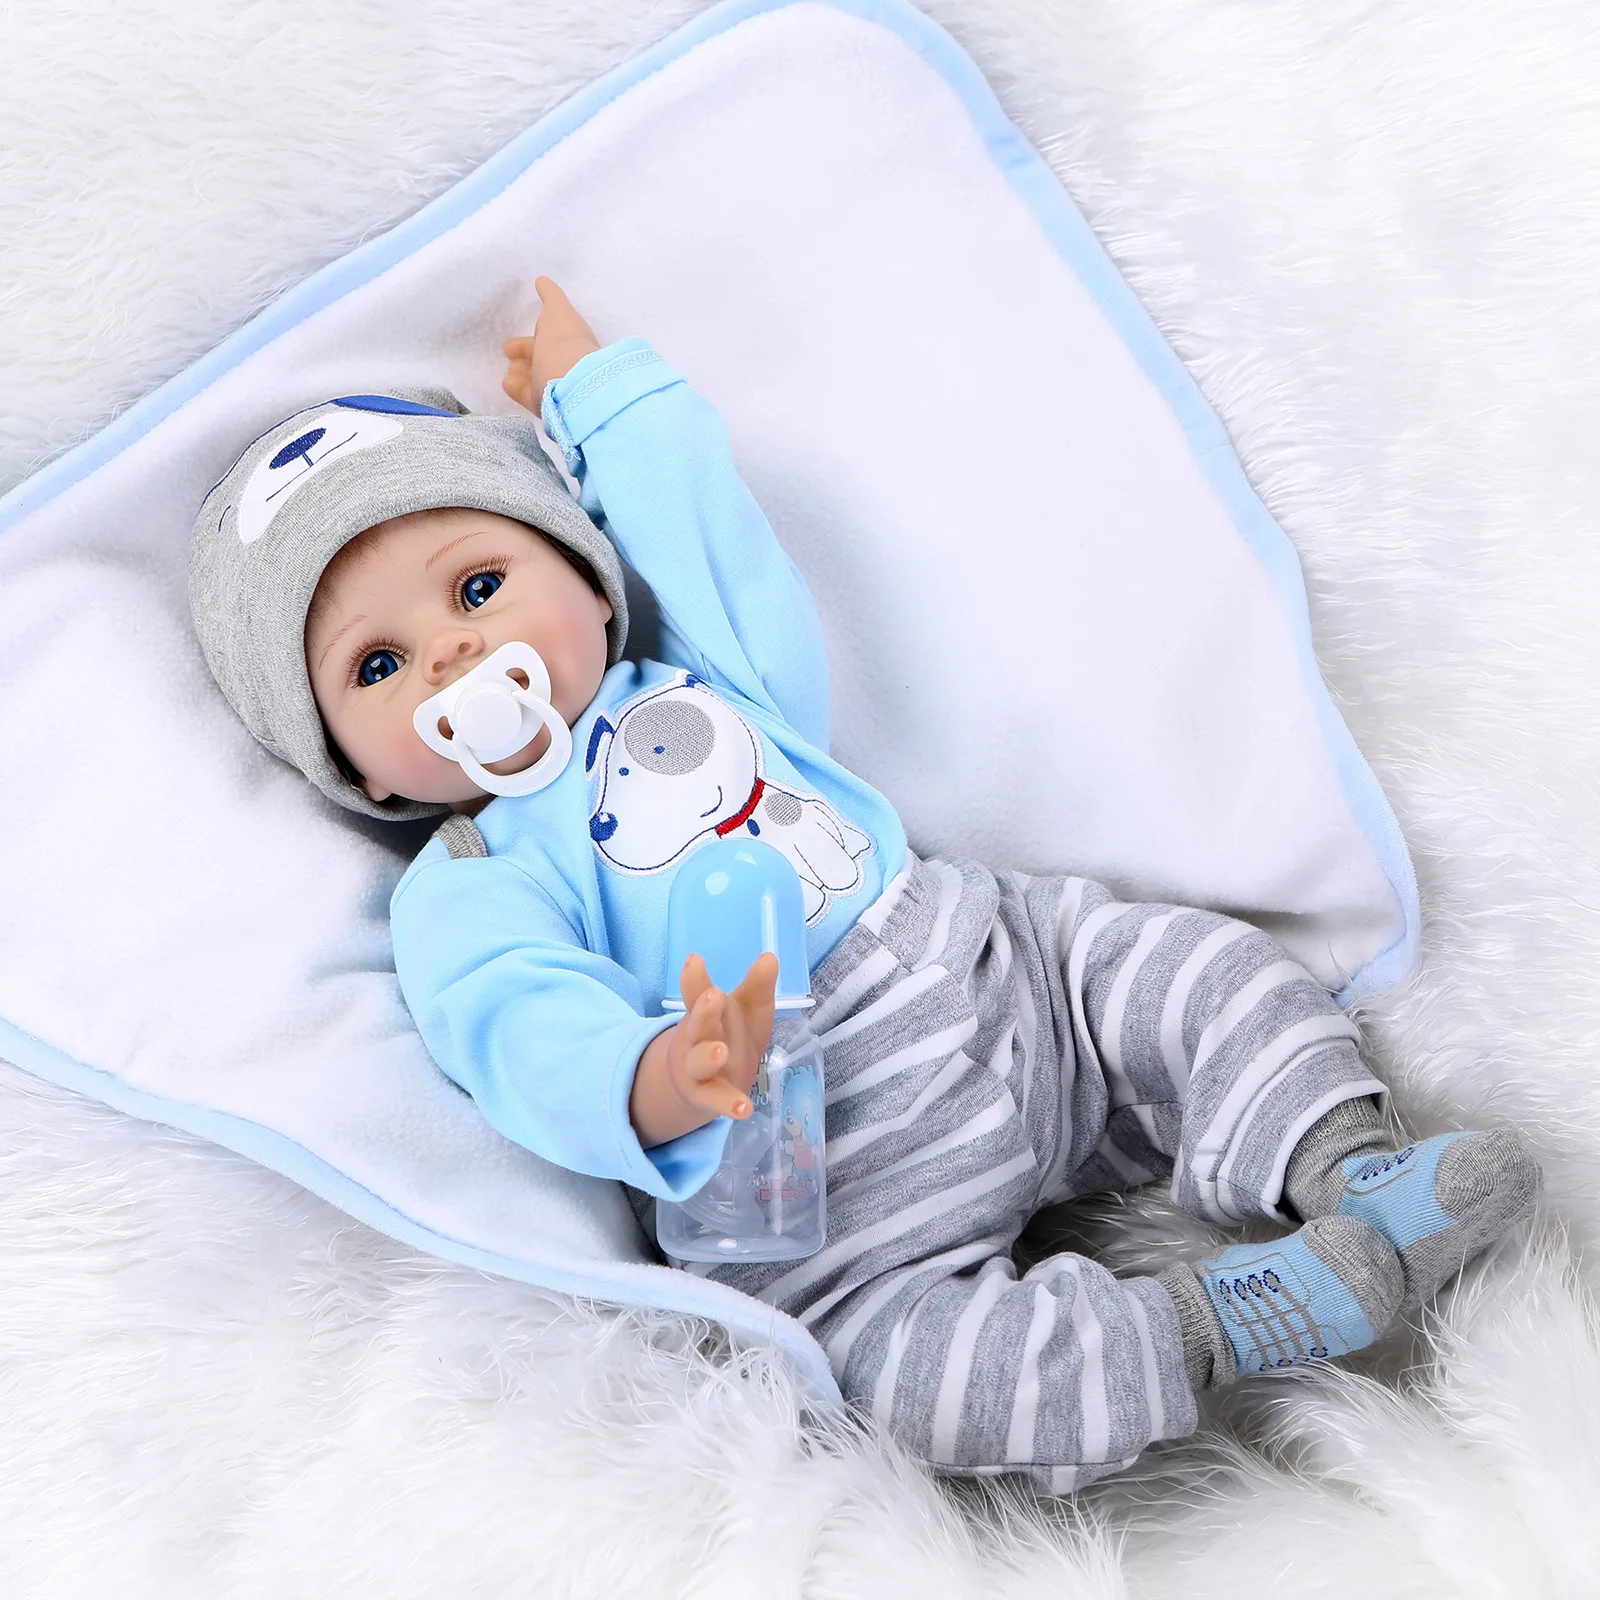 

55cm Girl Reborn Dolls Lifelike Silicone Bebe Reborn Toys Blue Eyes Cotton Body Baby Doll With Pacifier Children Play House Toys